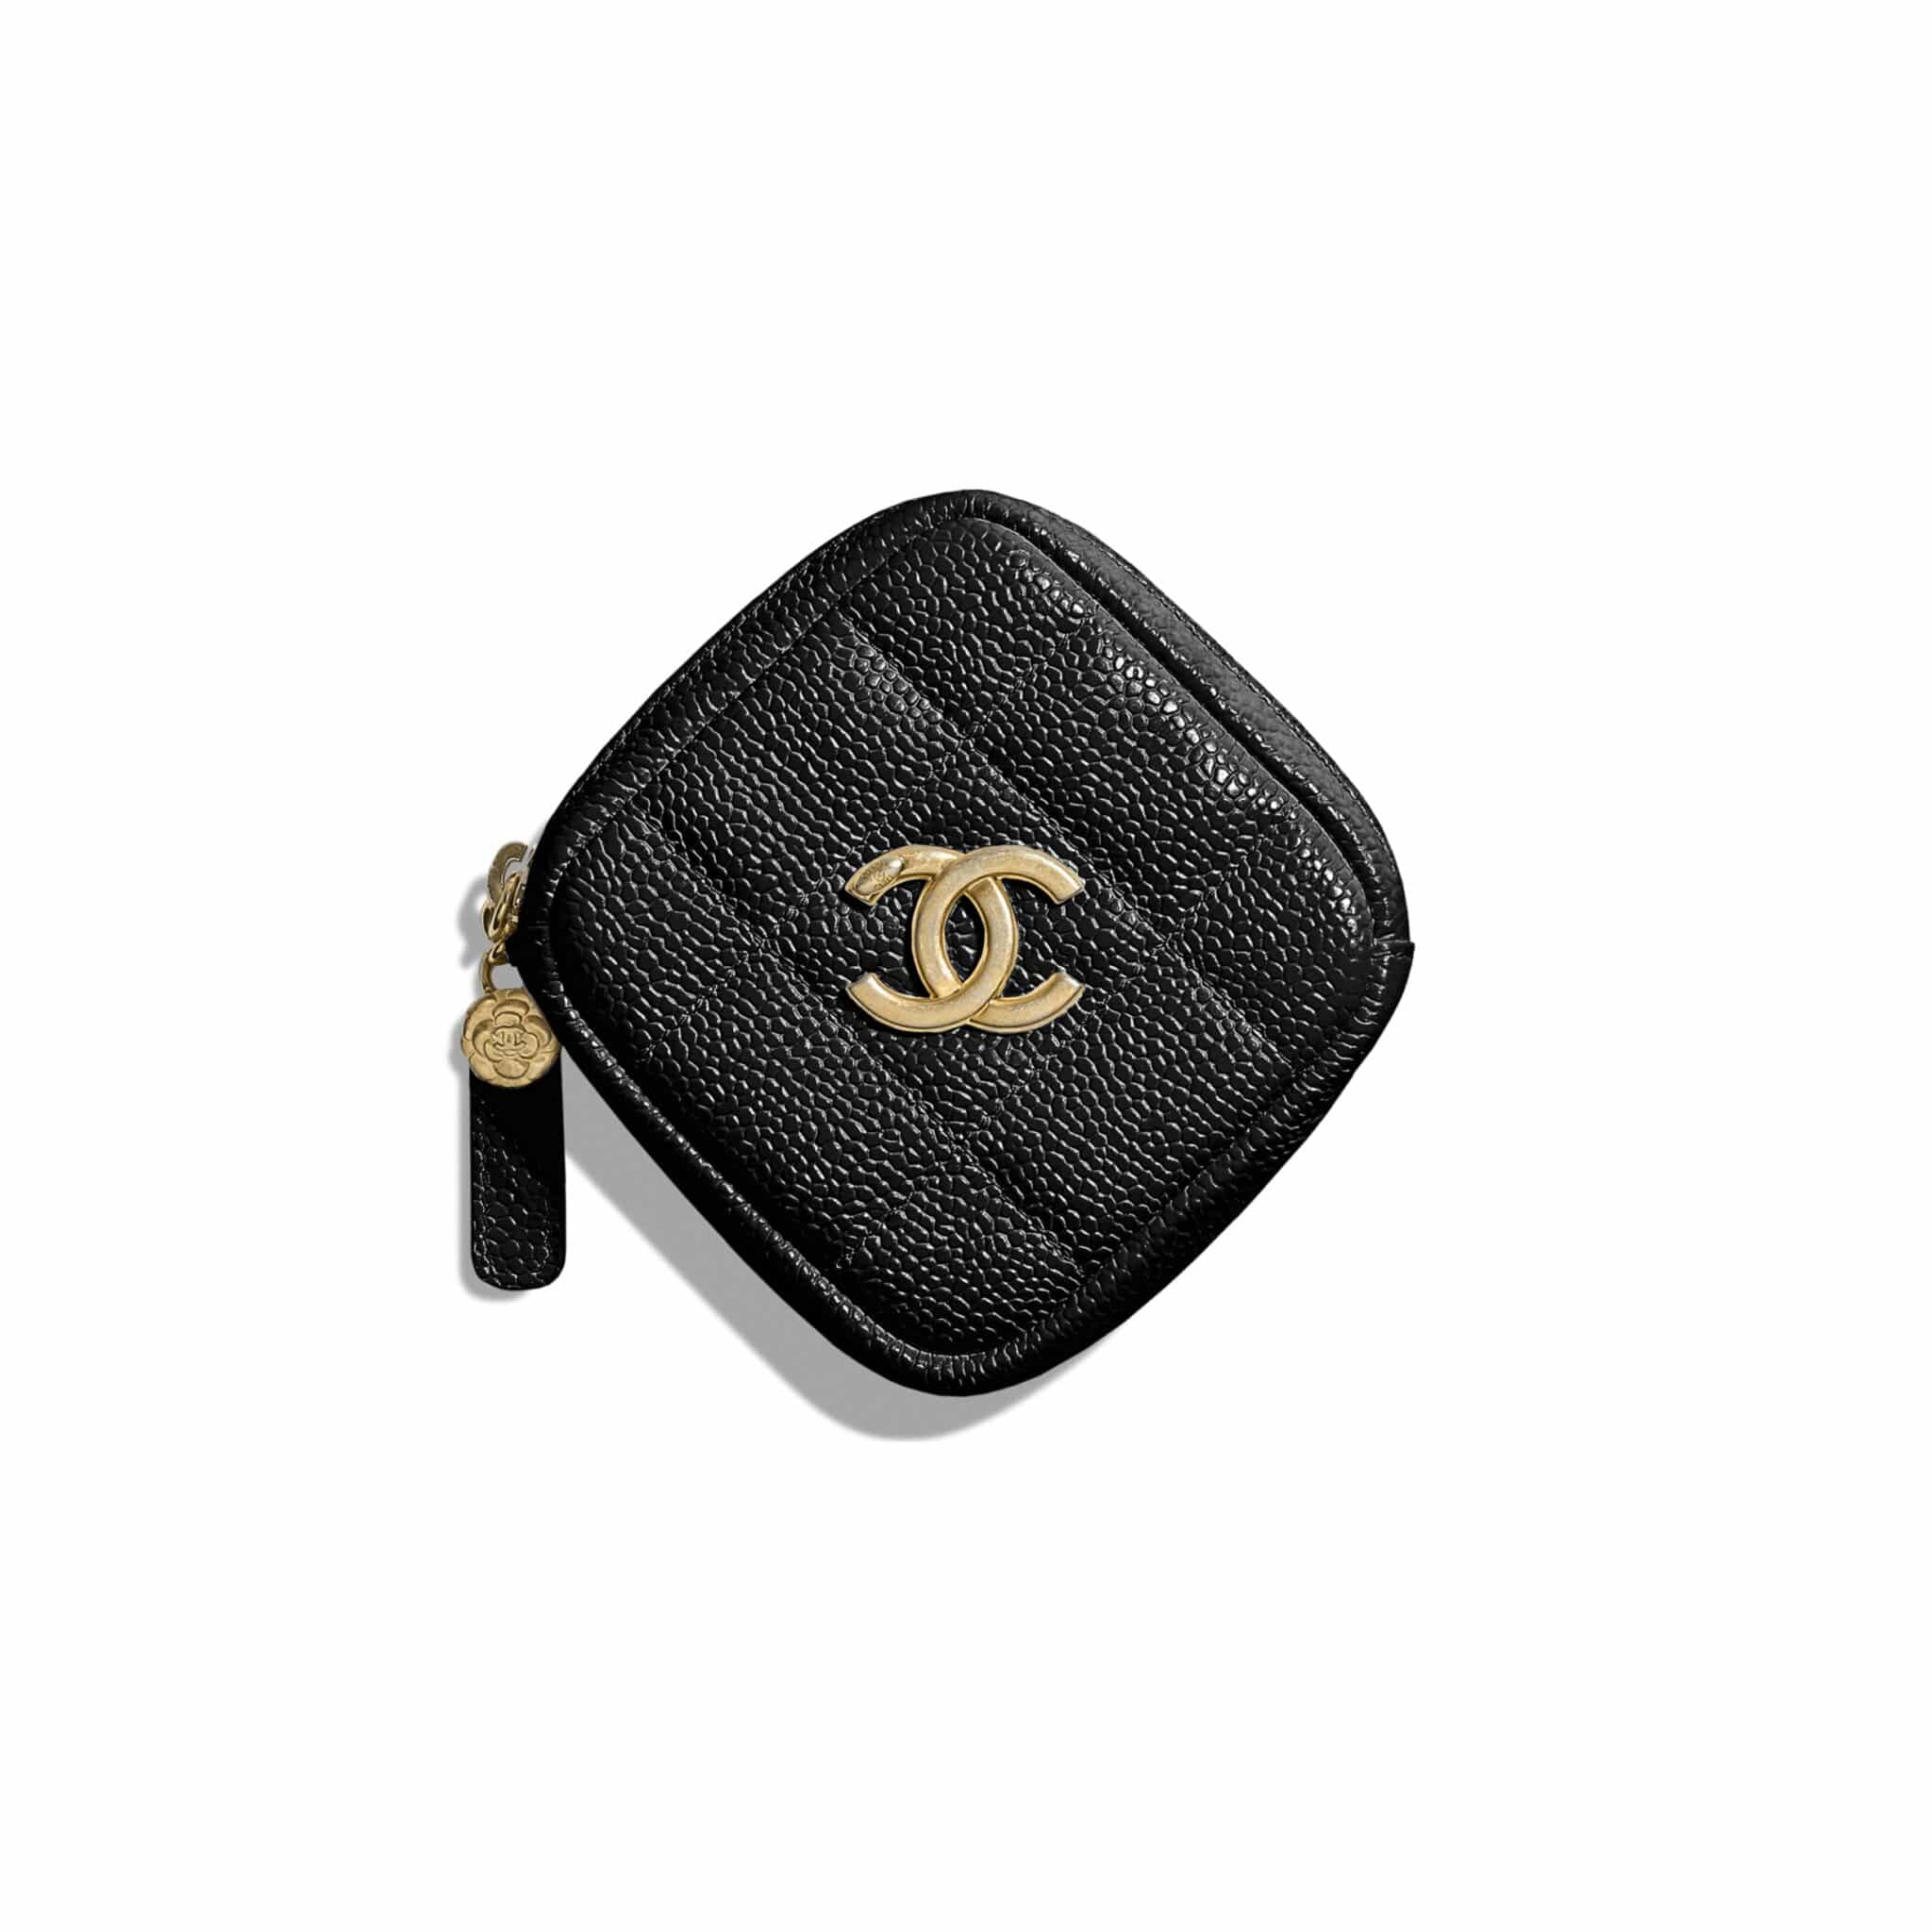 2016 Small Leather Goods & Belt Collection (LV, Chanel and Hermes) 